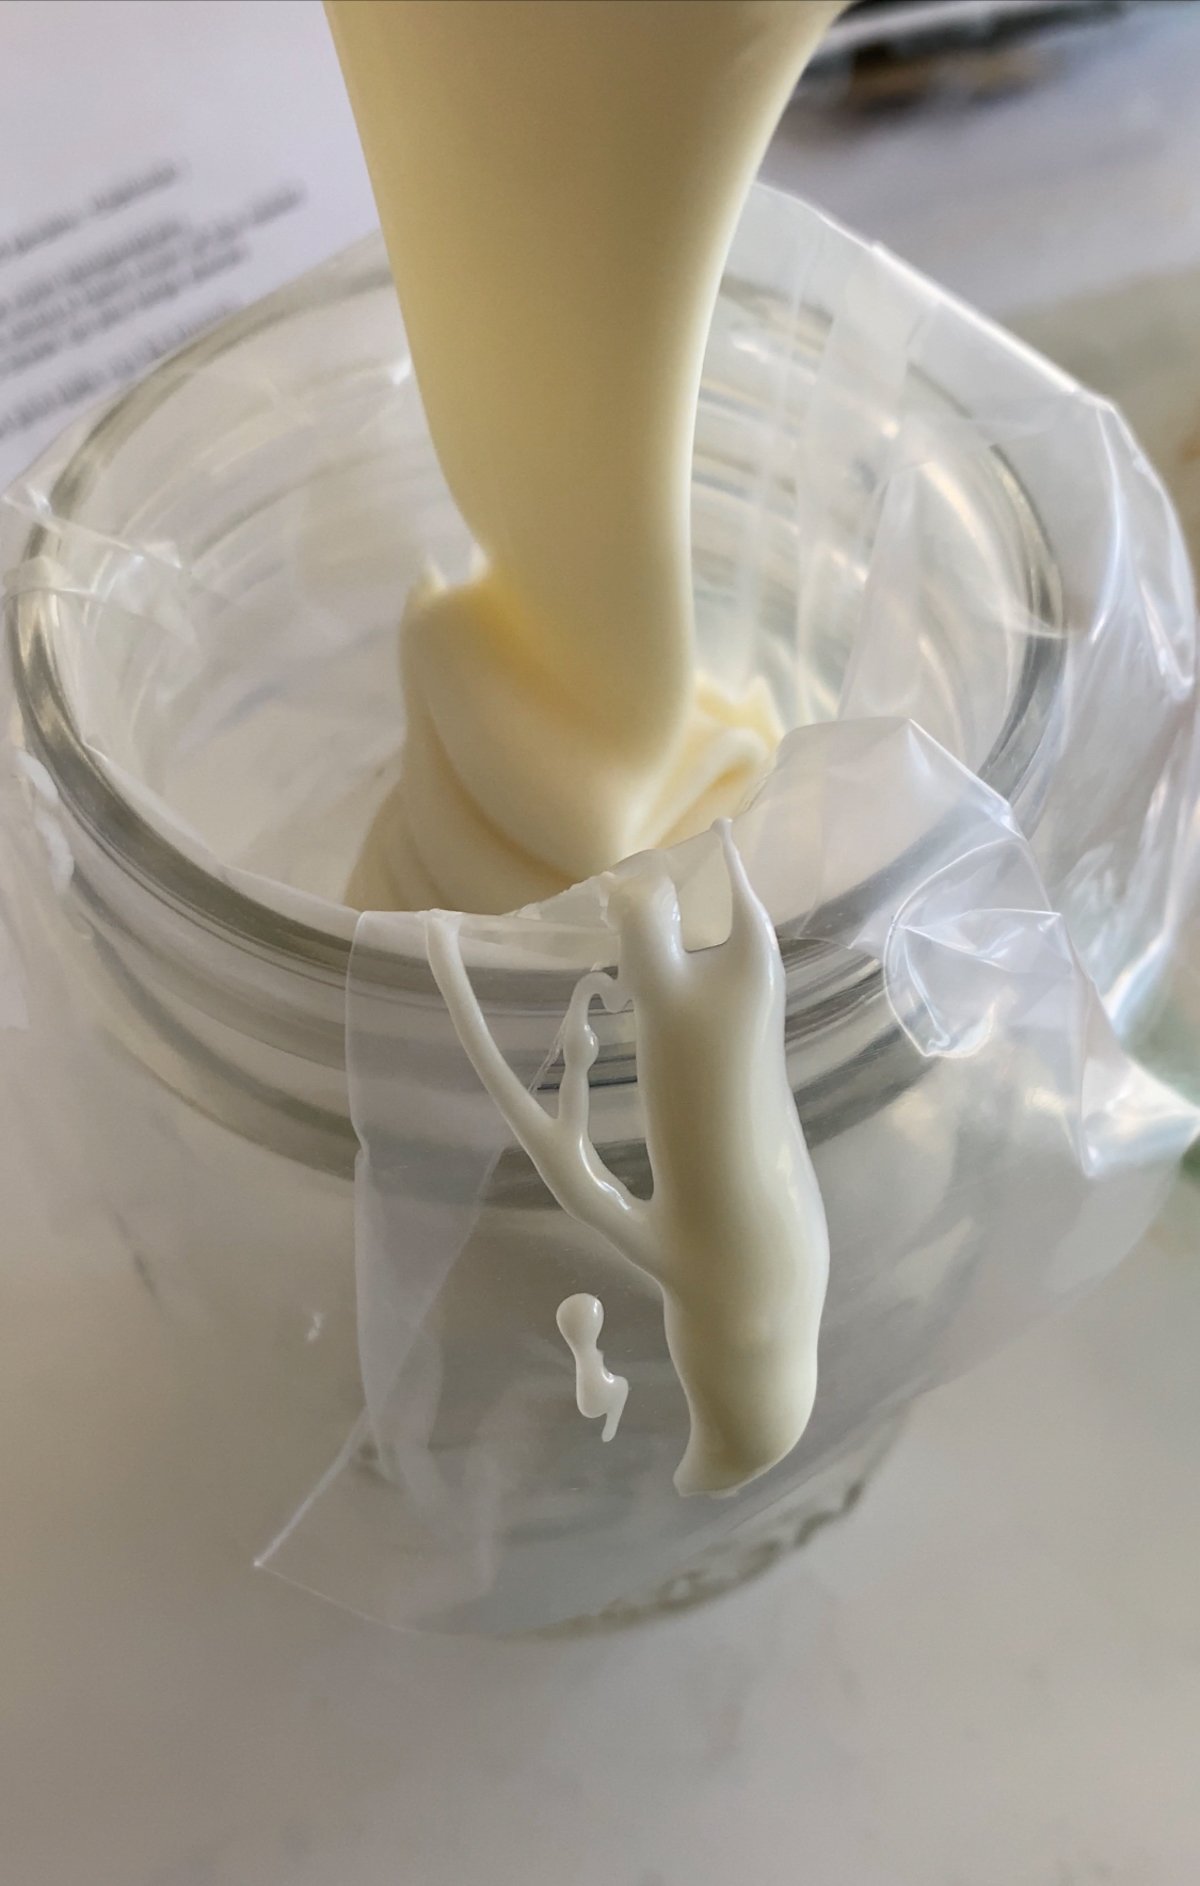 melted white chocolate in a jar